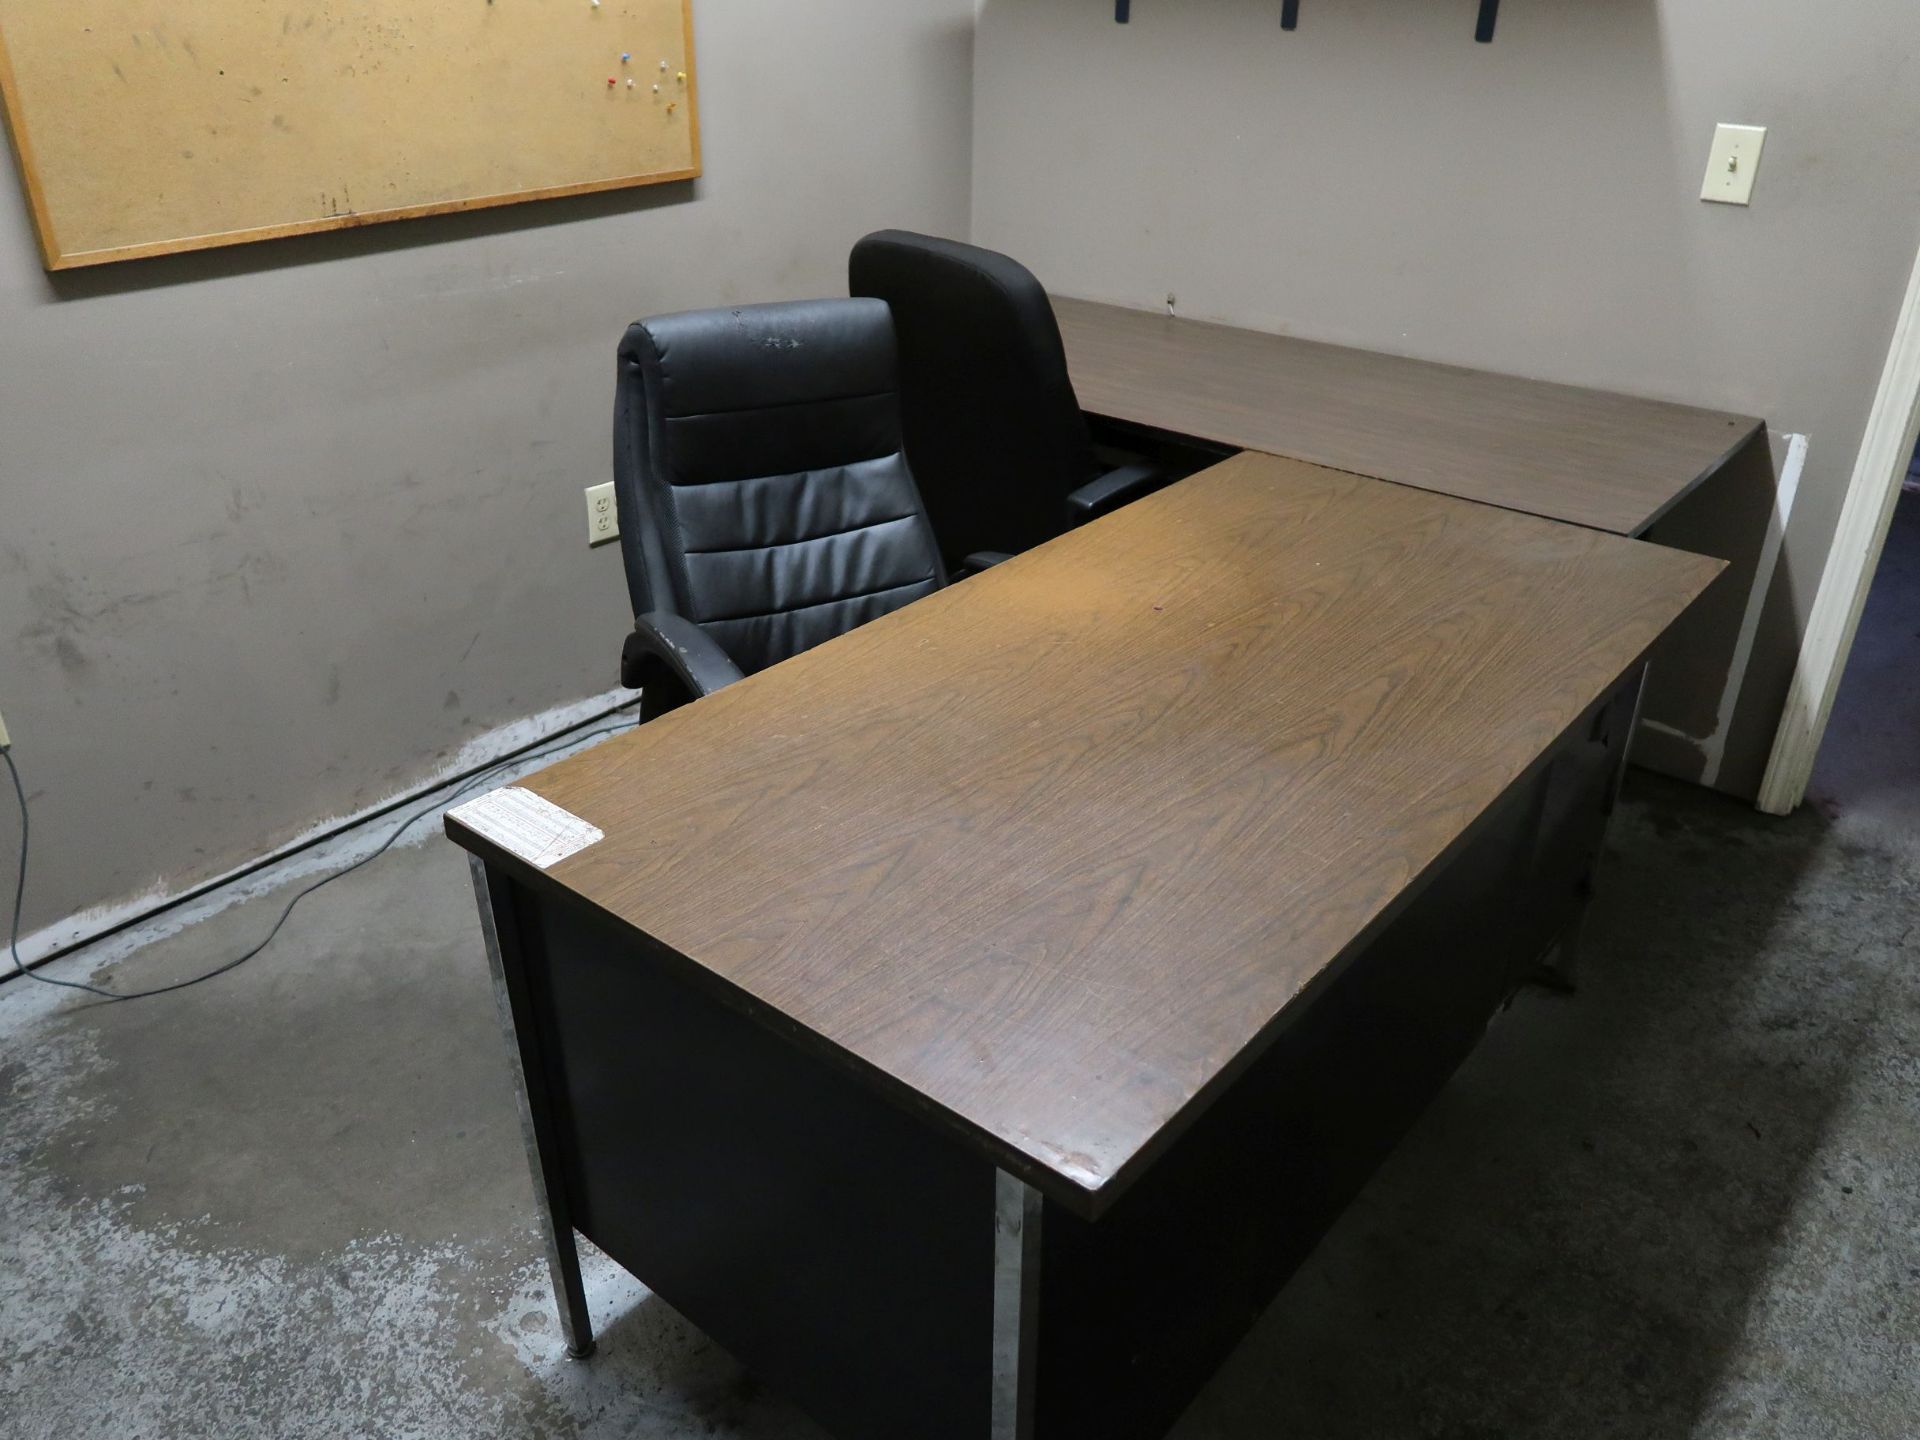 (LOT) CONTENTS OF OFFICE AND MISCELLANEOUS OFFICE FURNITURE - Image 2 of 2